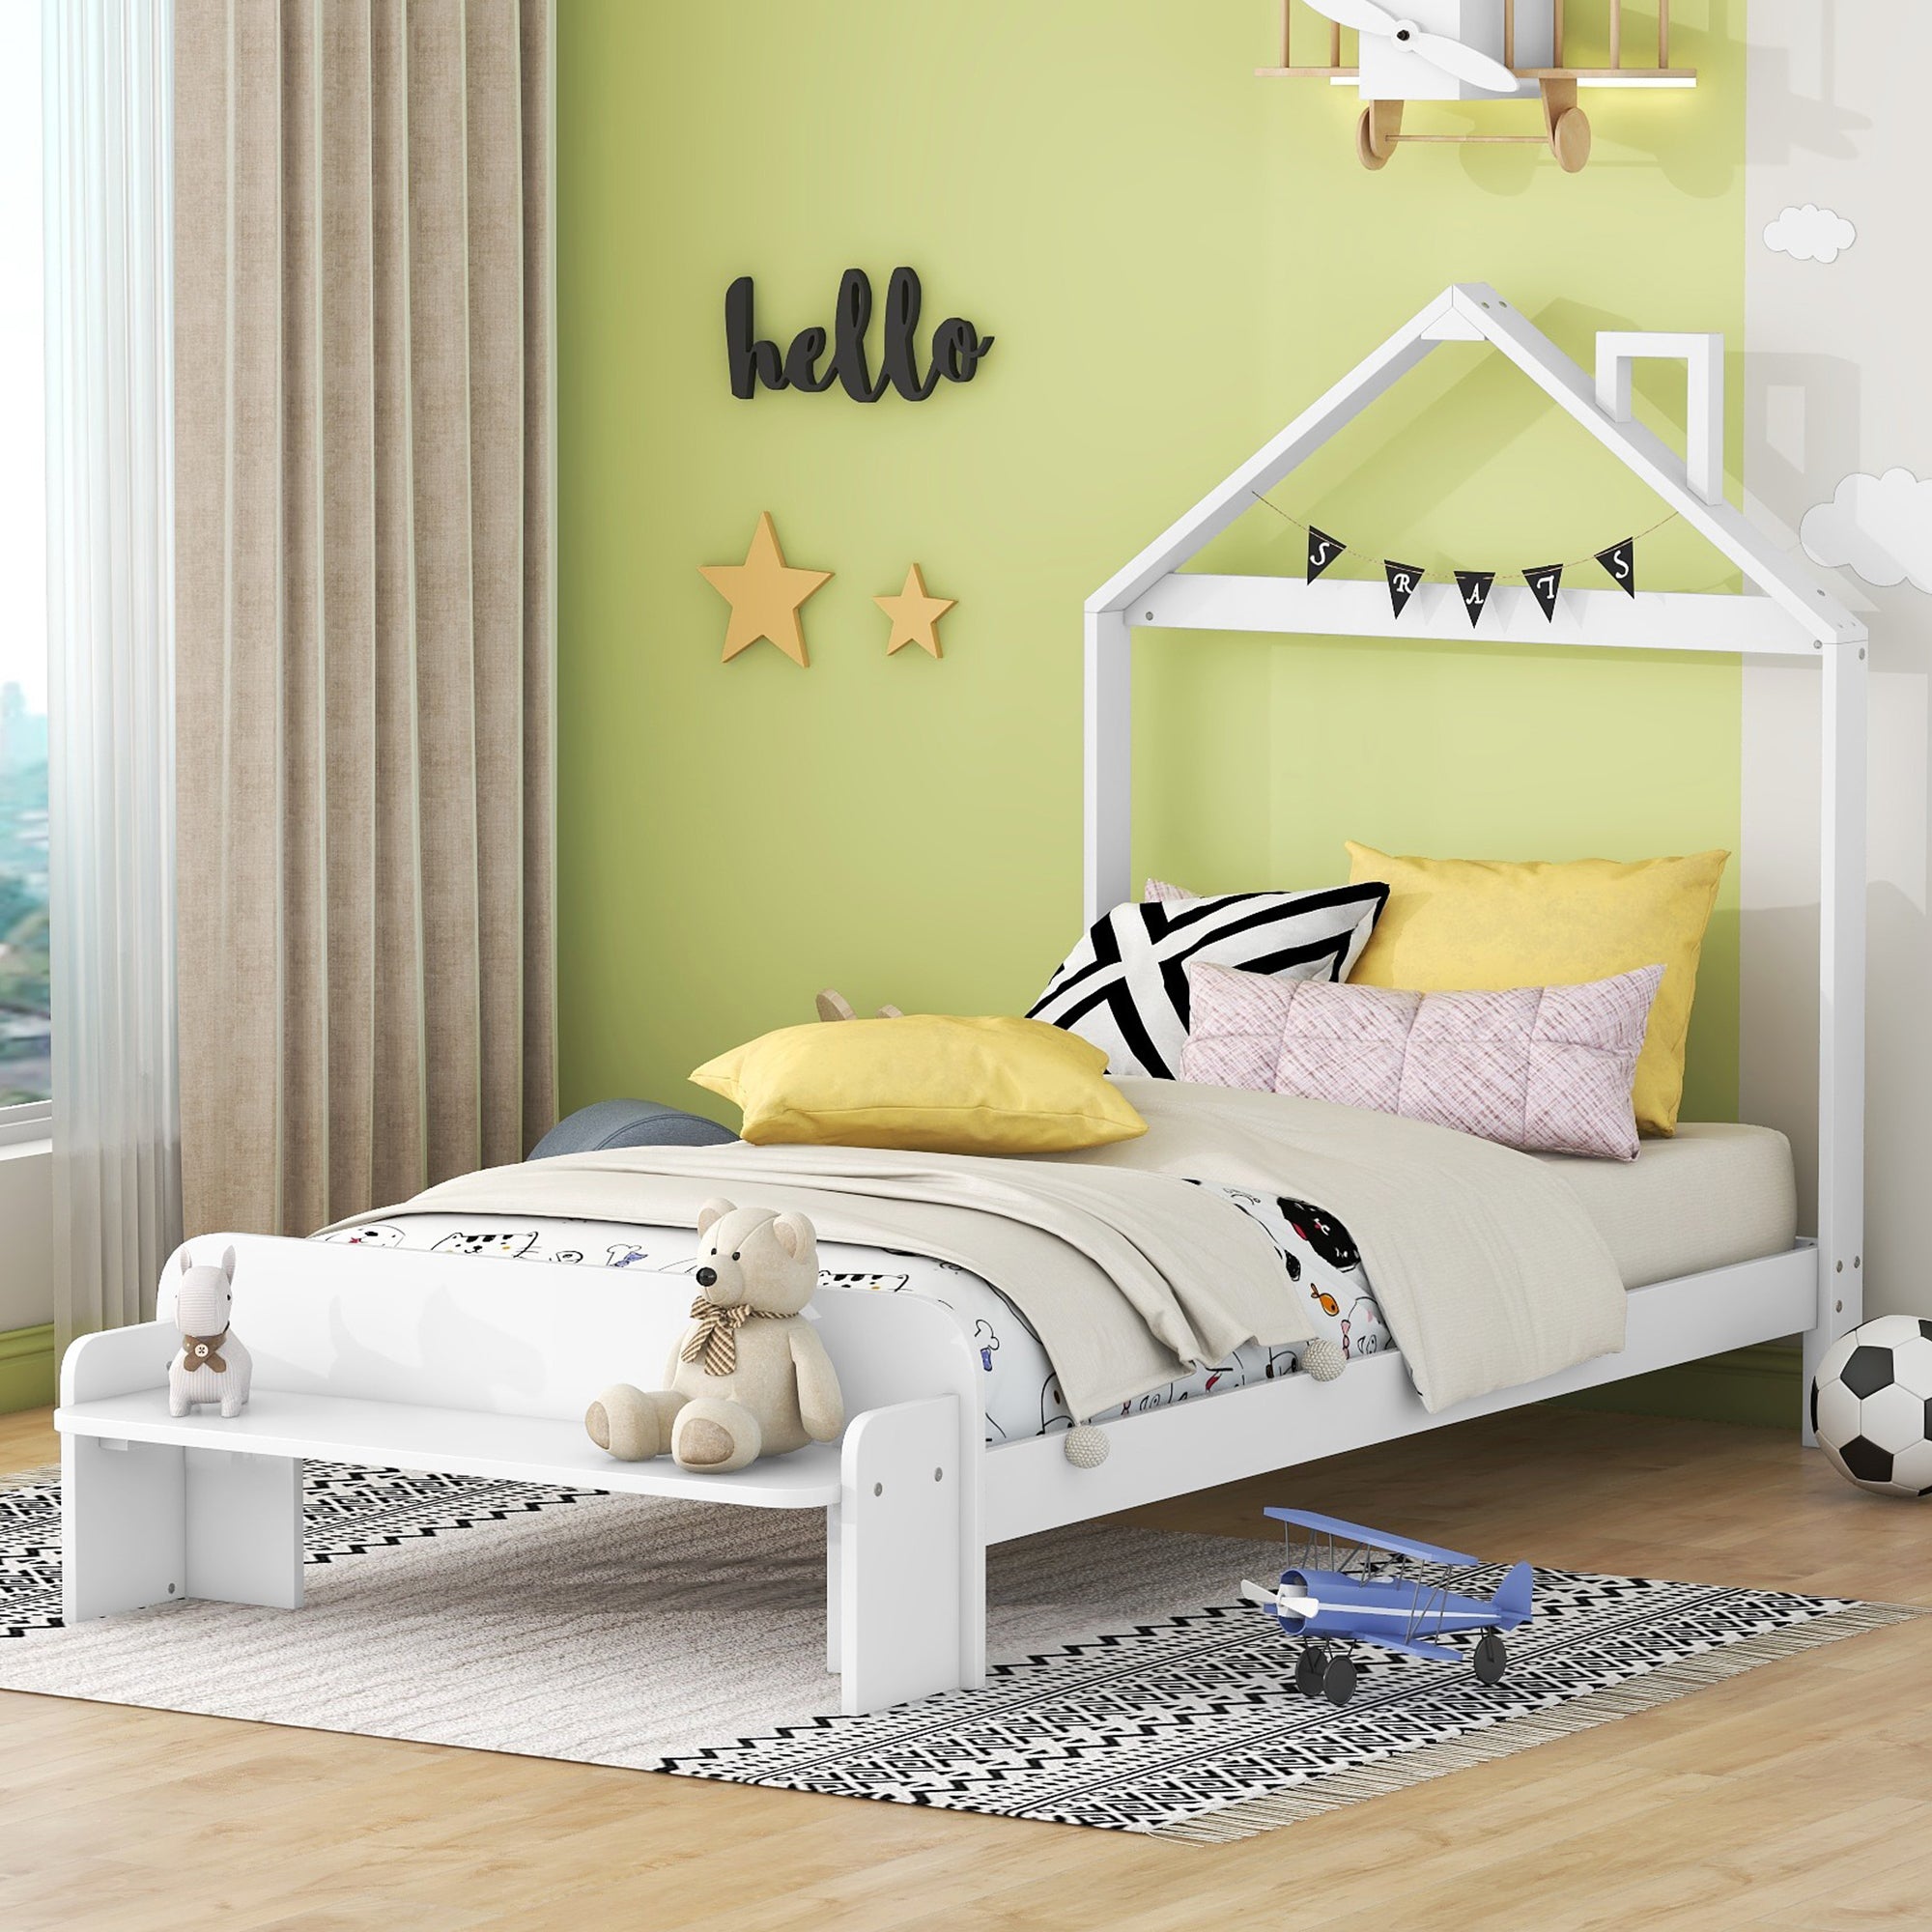 ZNTS Twin Size Wood Platform Bed with House-shaped Headboard and Footboard Bench,White WF307085AAK